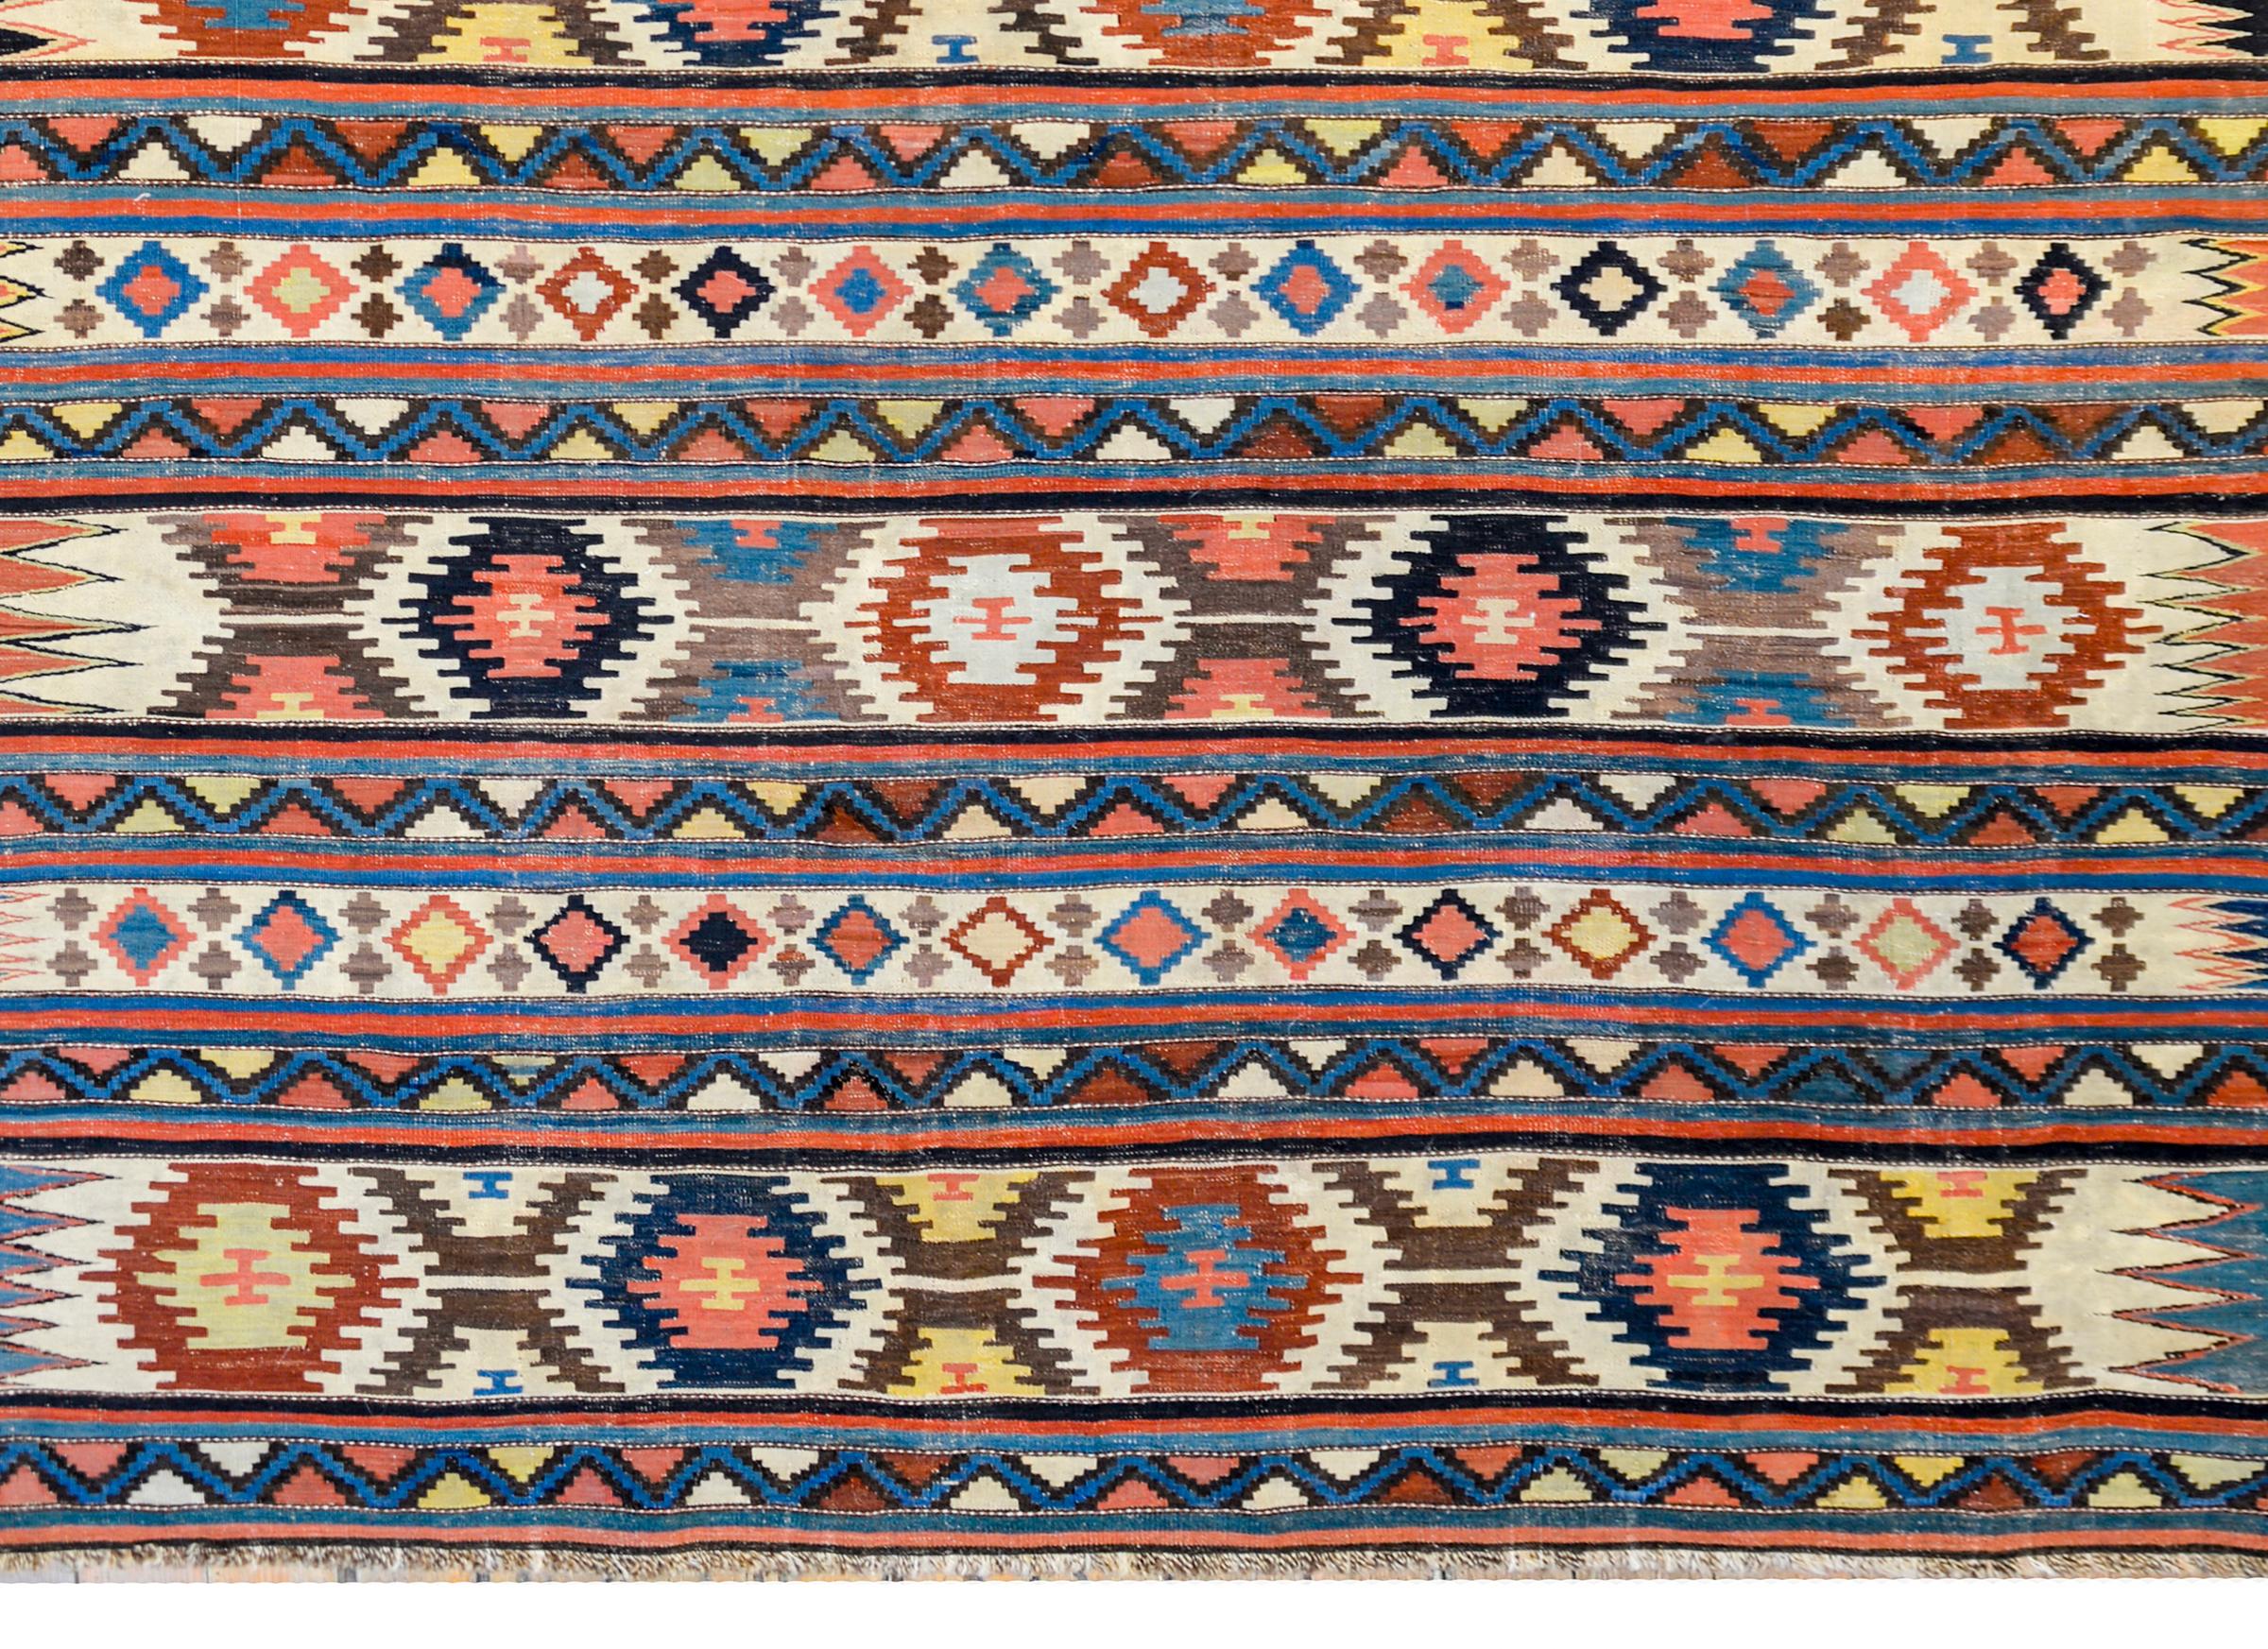 Extraordinary Early 20th Century Shirvan Kilim Rug In Good Condition For Sale In Chicago, IL